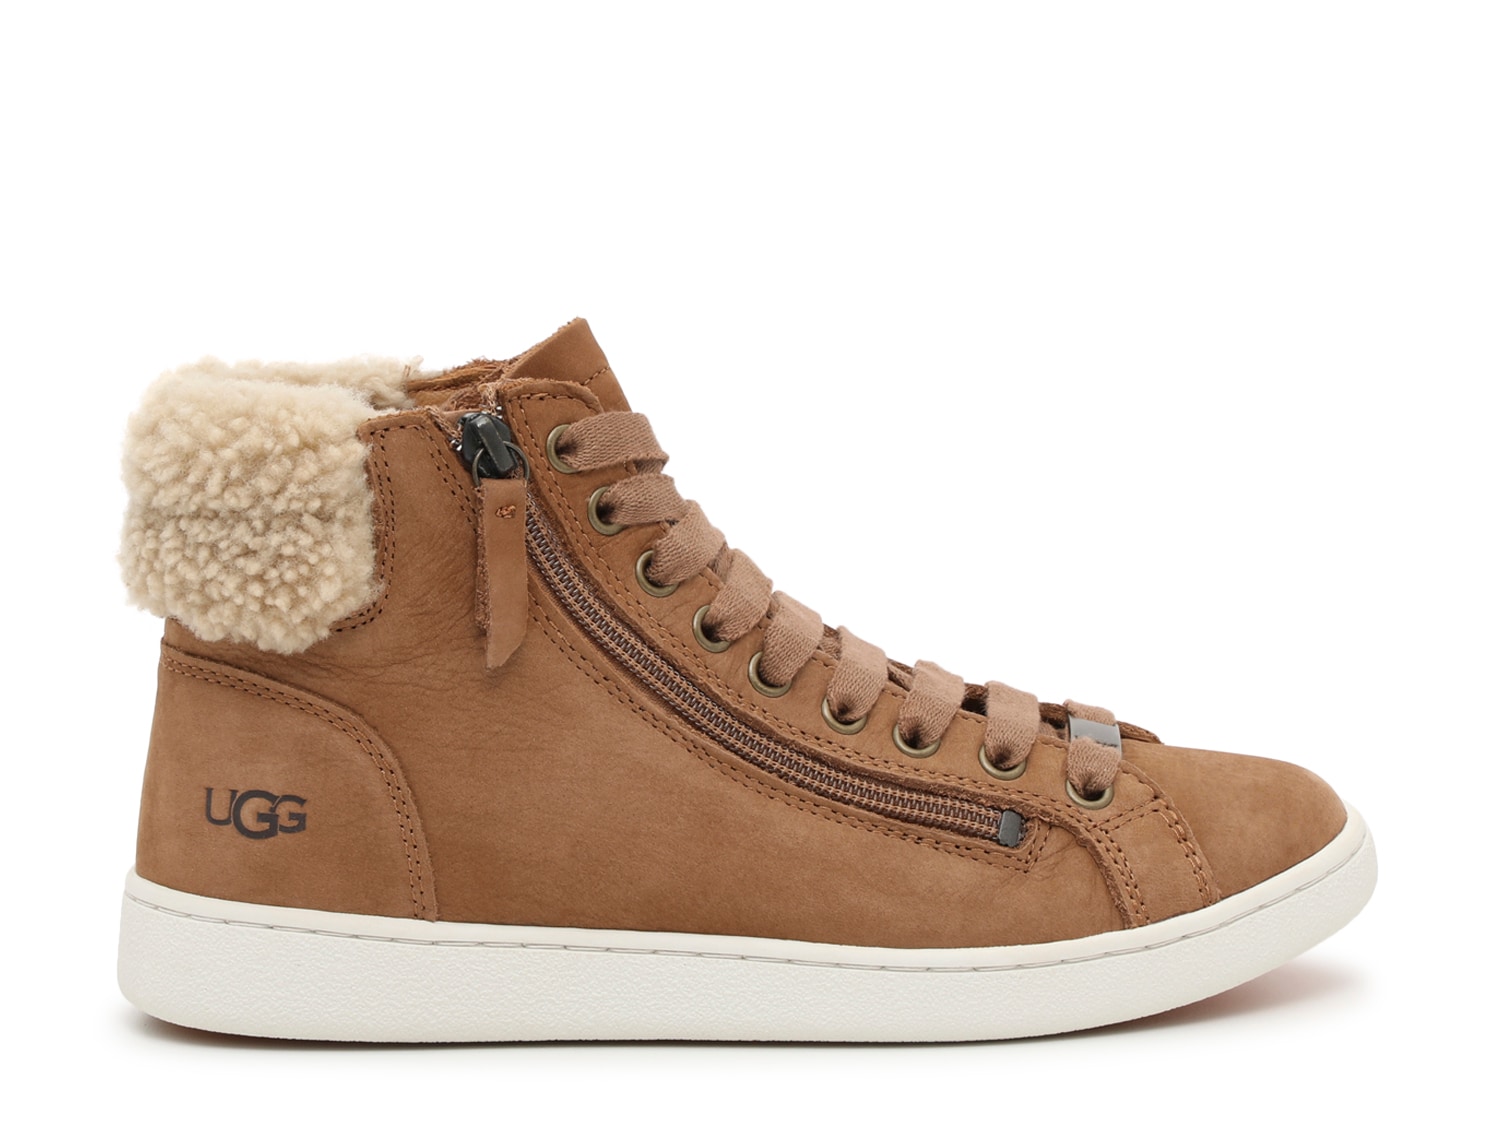 ugg athletic shoes